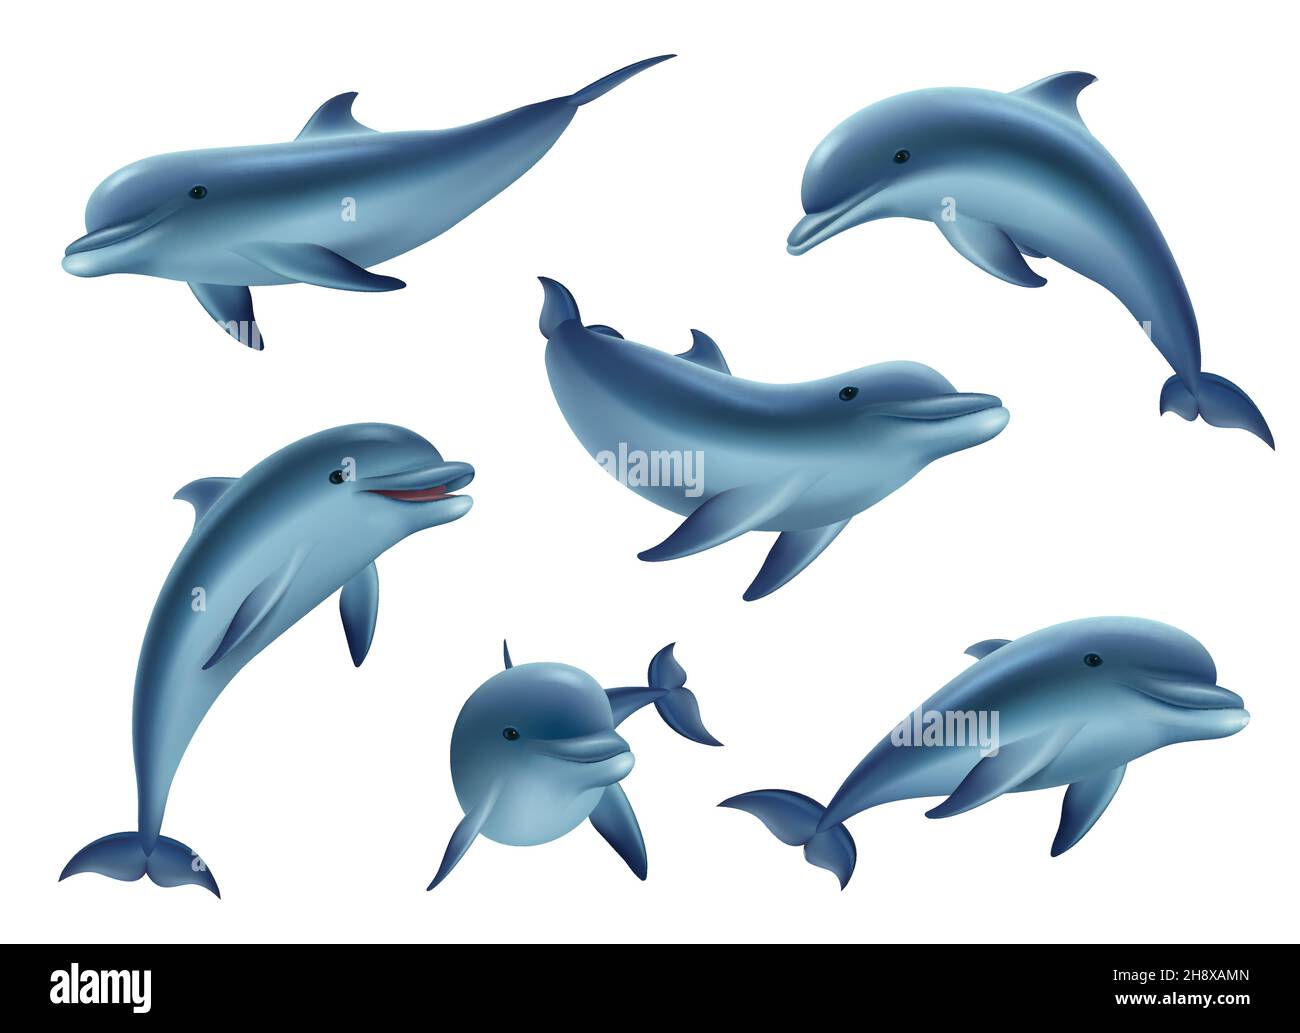 Swim dolphins. Aquarium or ocean underwater marine animals big funny and kind fishes decent vector 3d dolphins in action poses Stock Vector